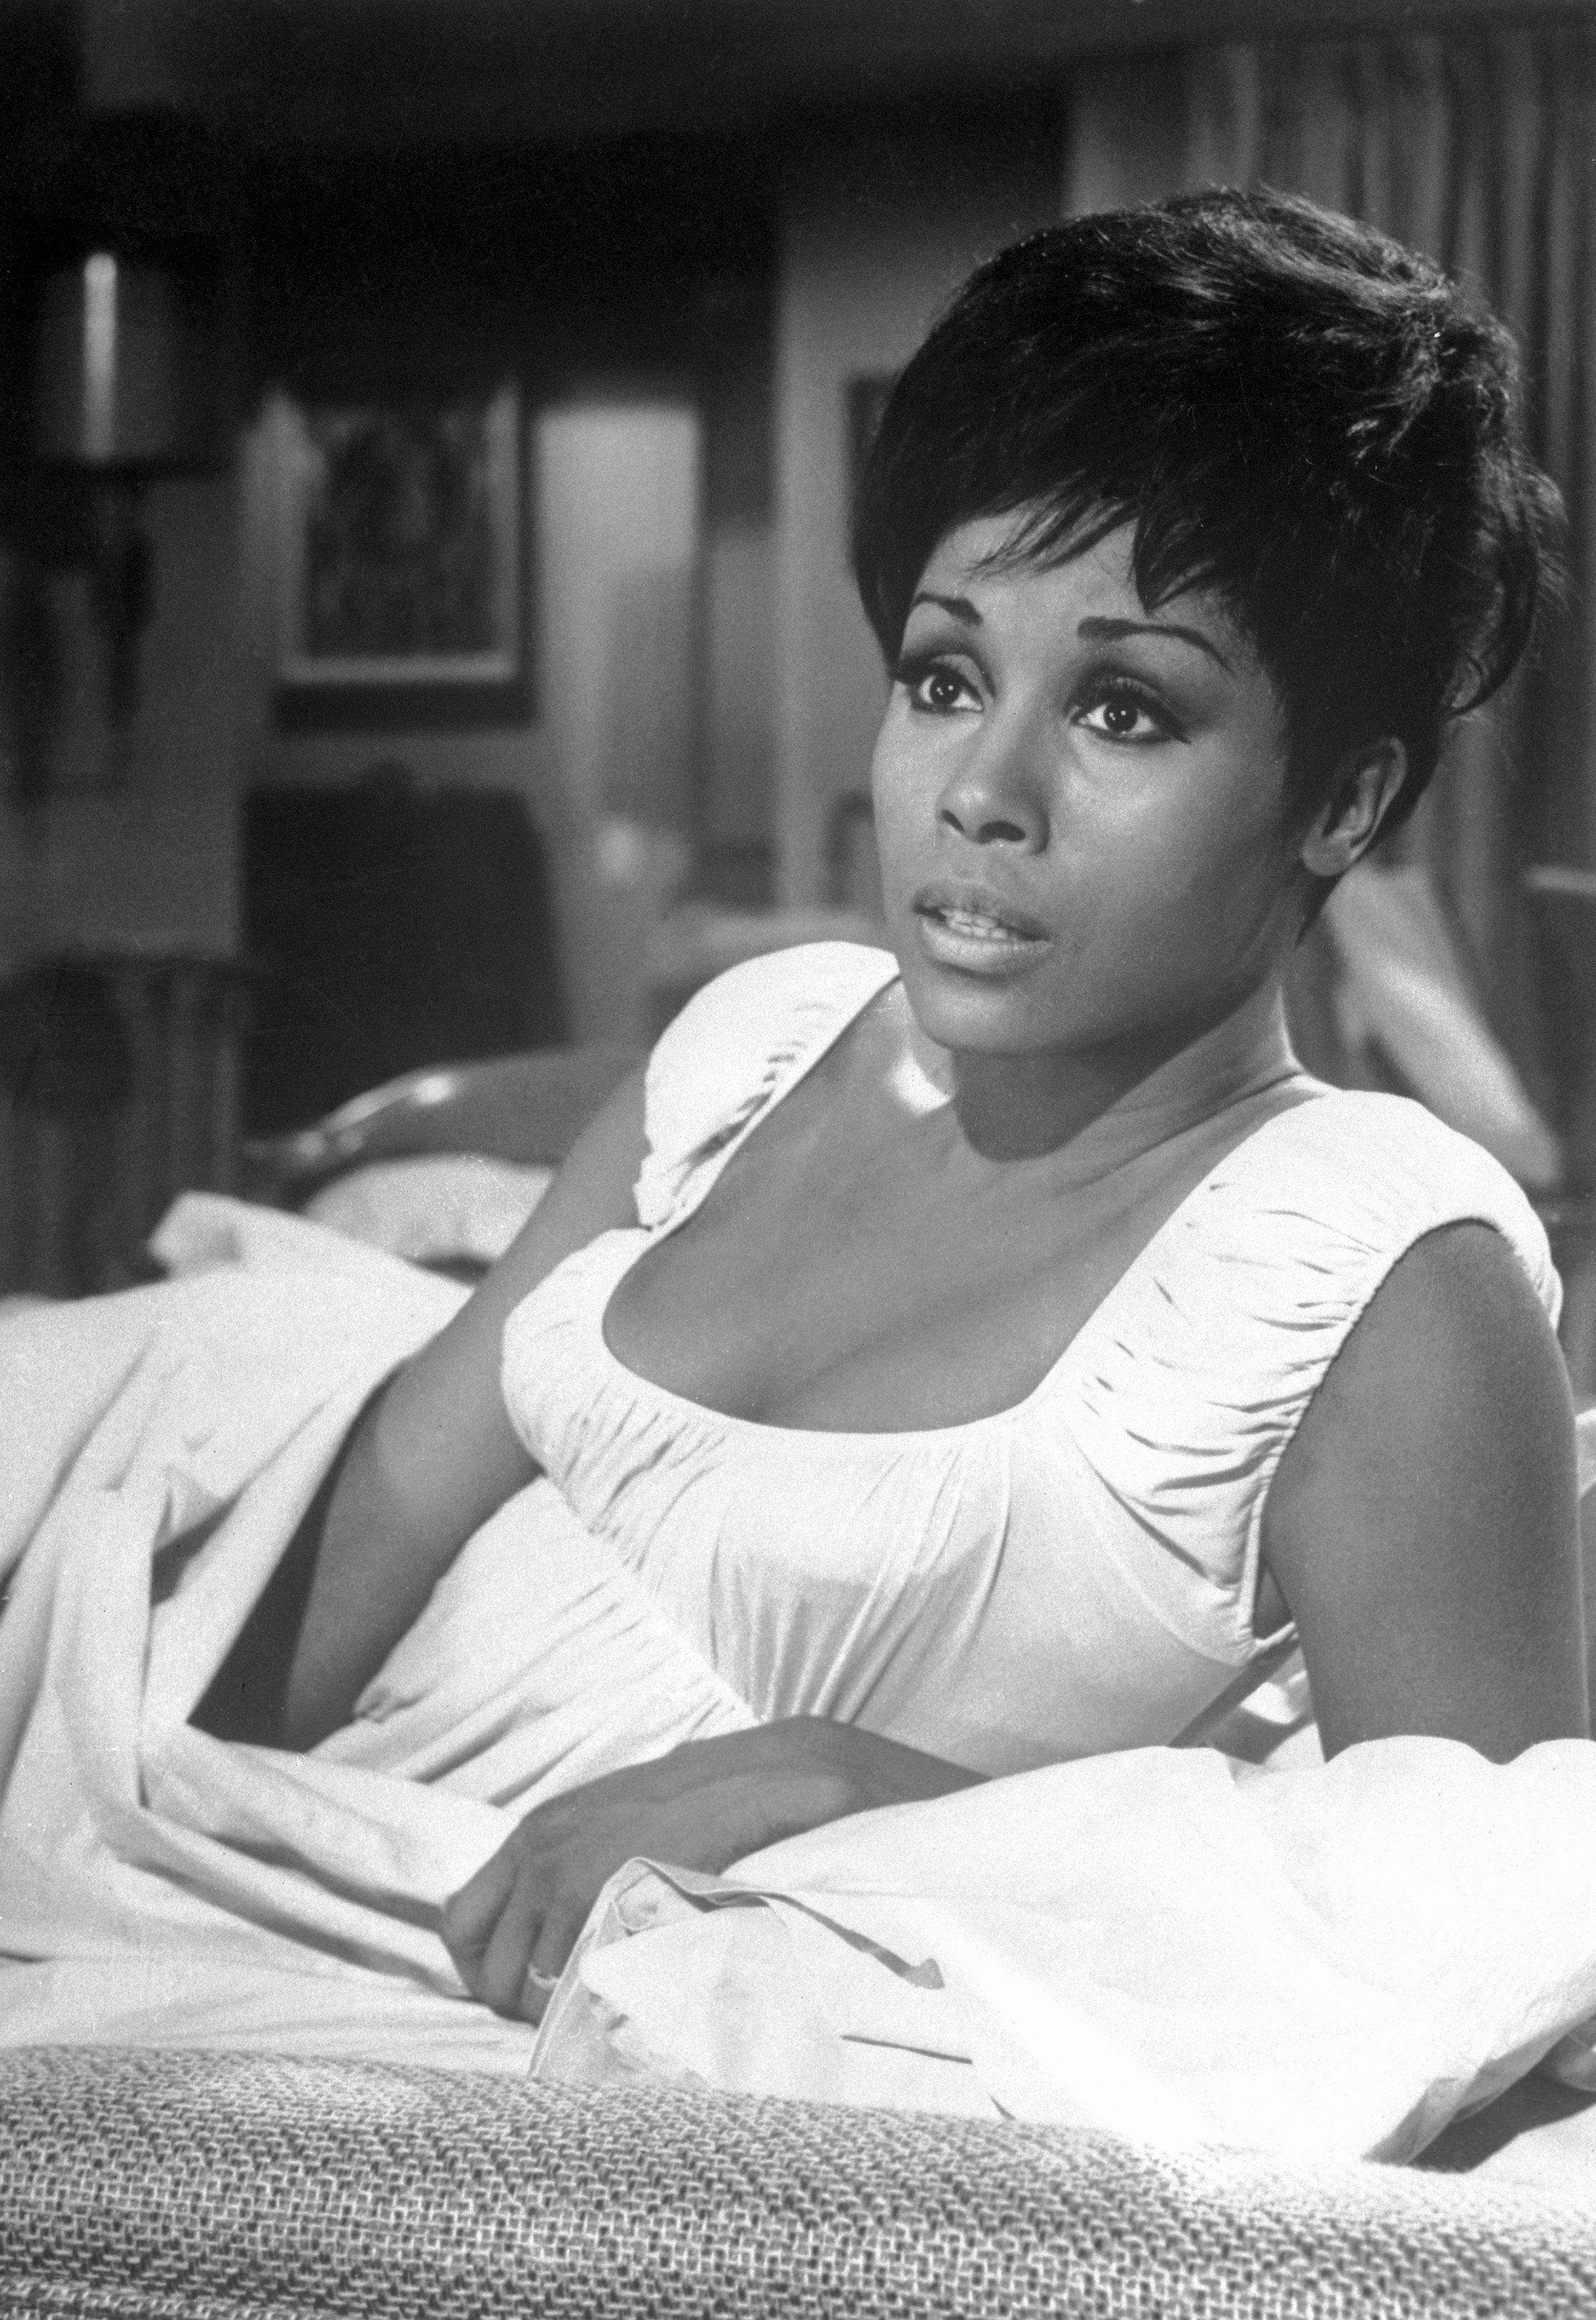 <p>Singer-actress Diahann Carroll broke one of the biggest barriers in Hollywood when she become the first Black woman to star on a network television series -- NBC's "Julia" -- in 1968. In 1962, she also became the first Black woman to win a Tony Award.</p>